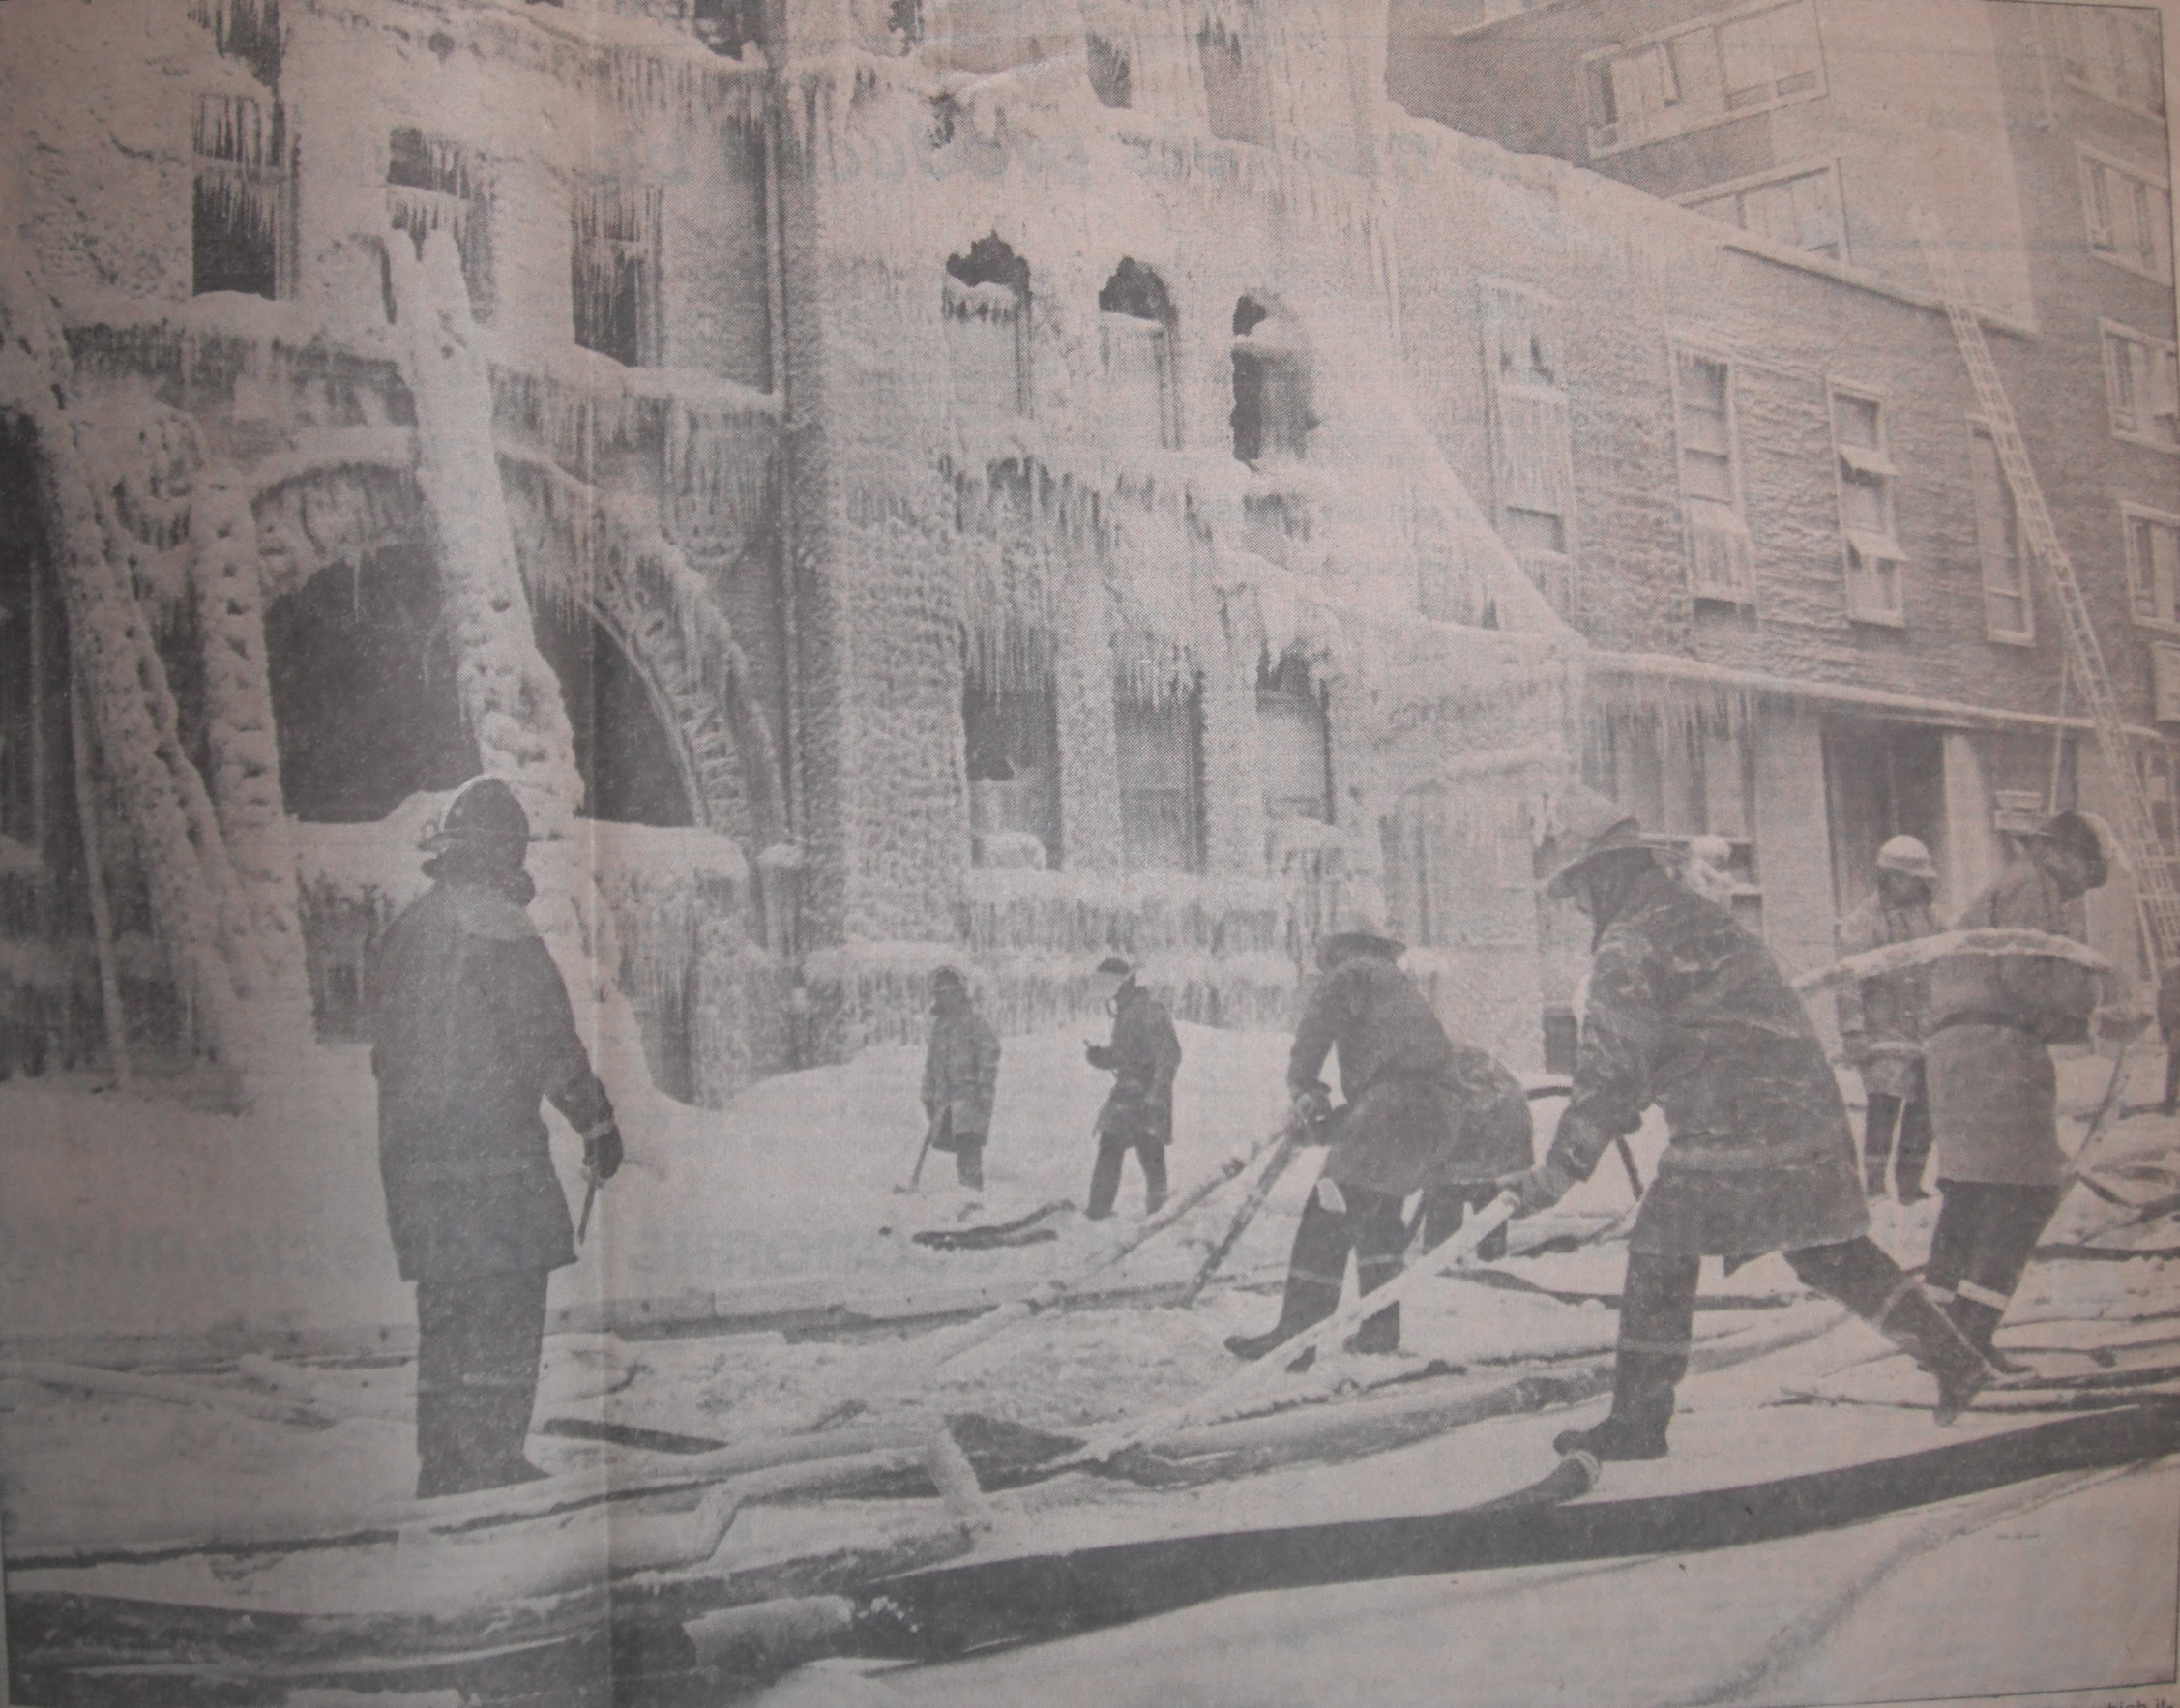 Firefighters pulling frozen lines from the ice that formed during the fire at the YM-YWCA fire.